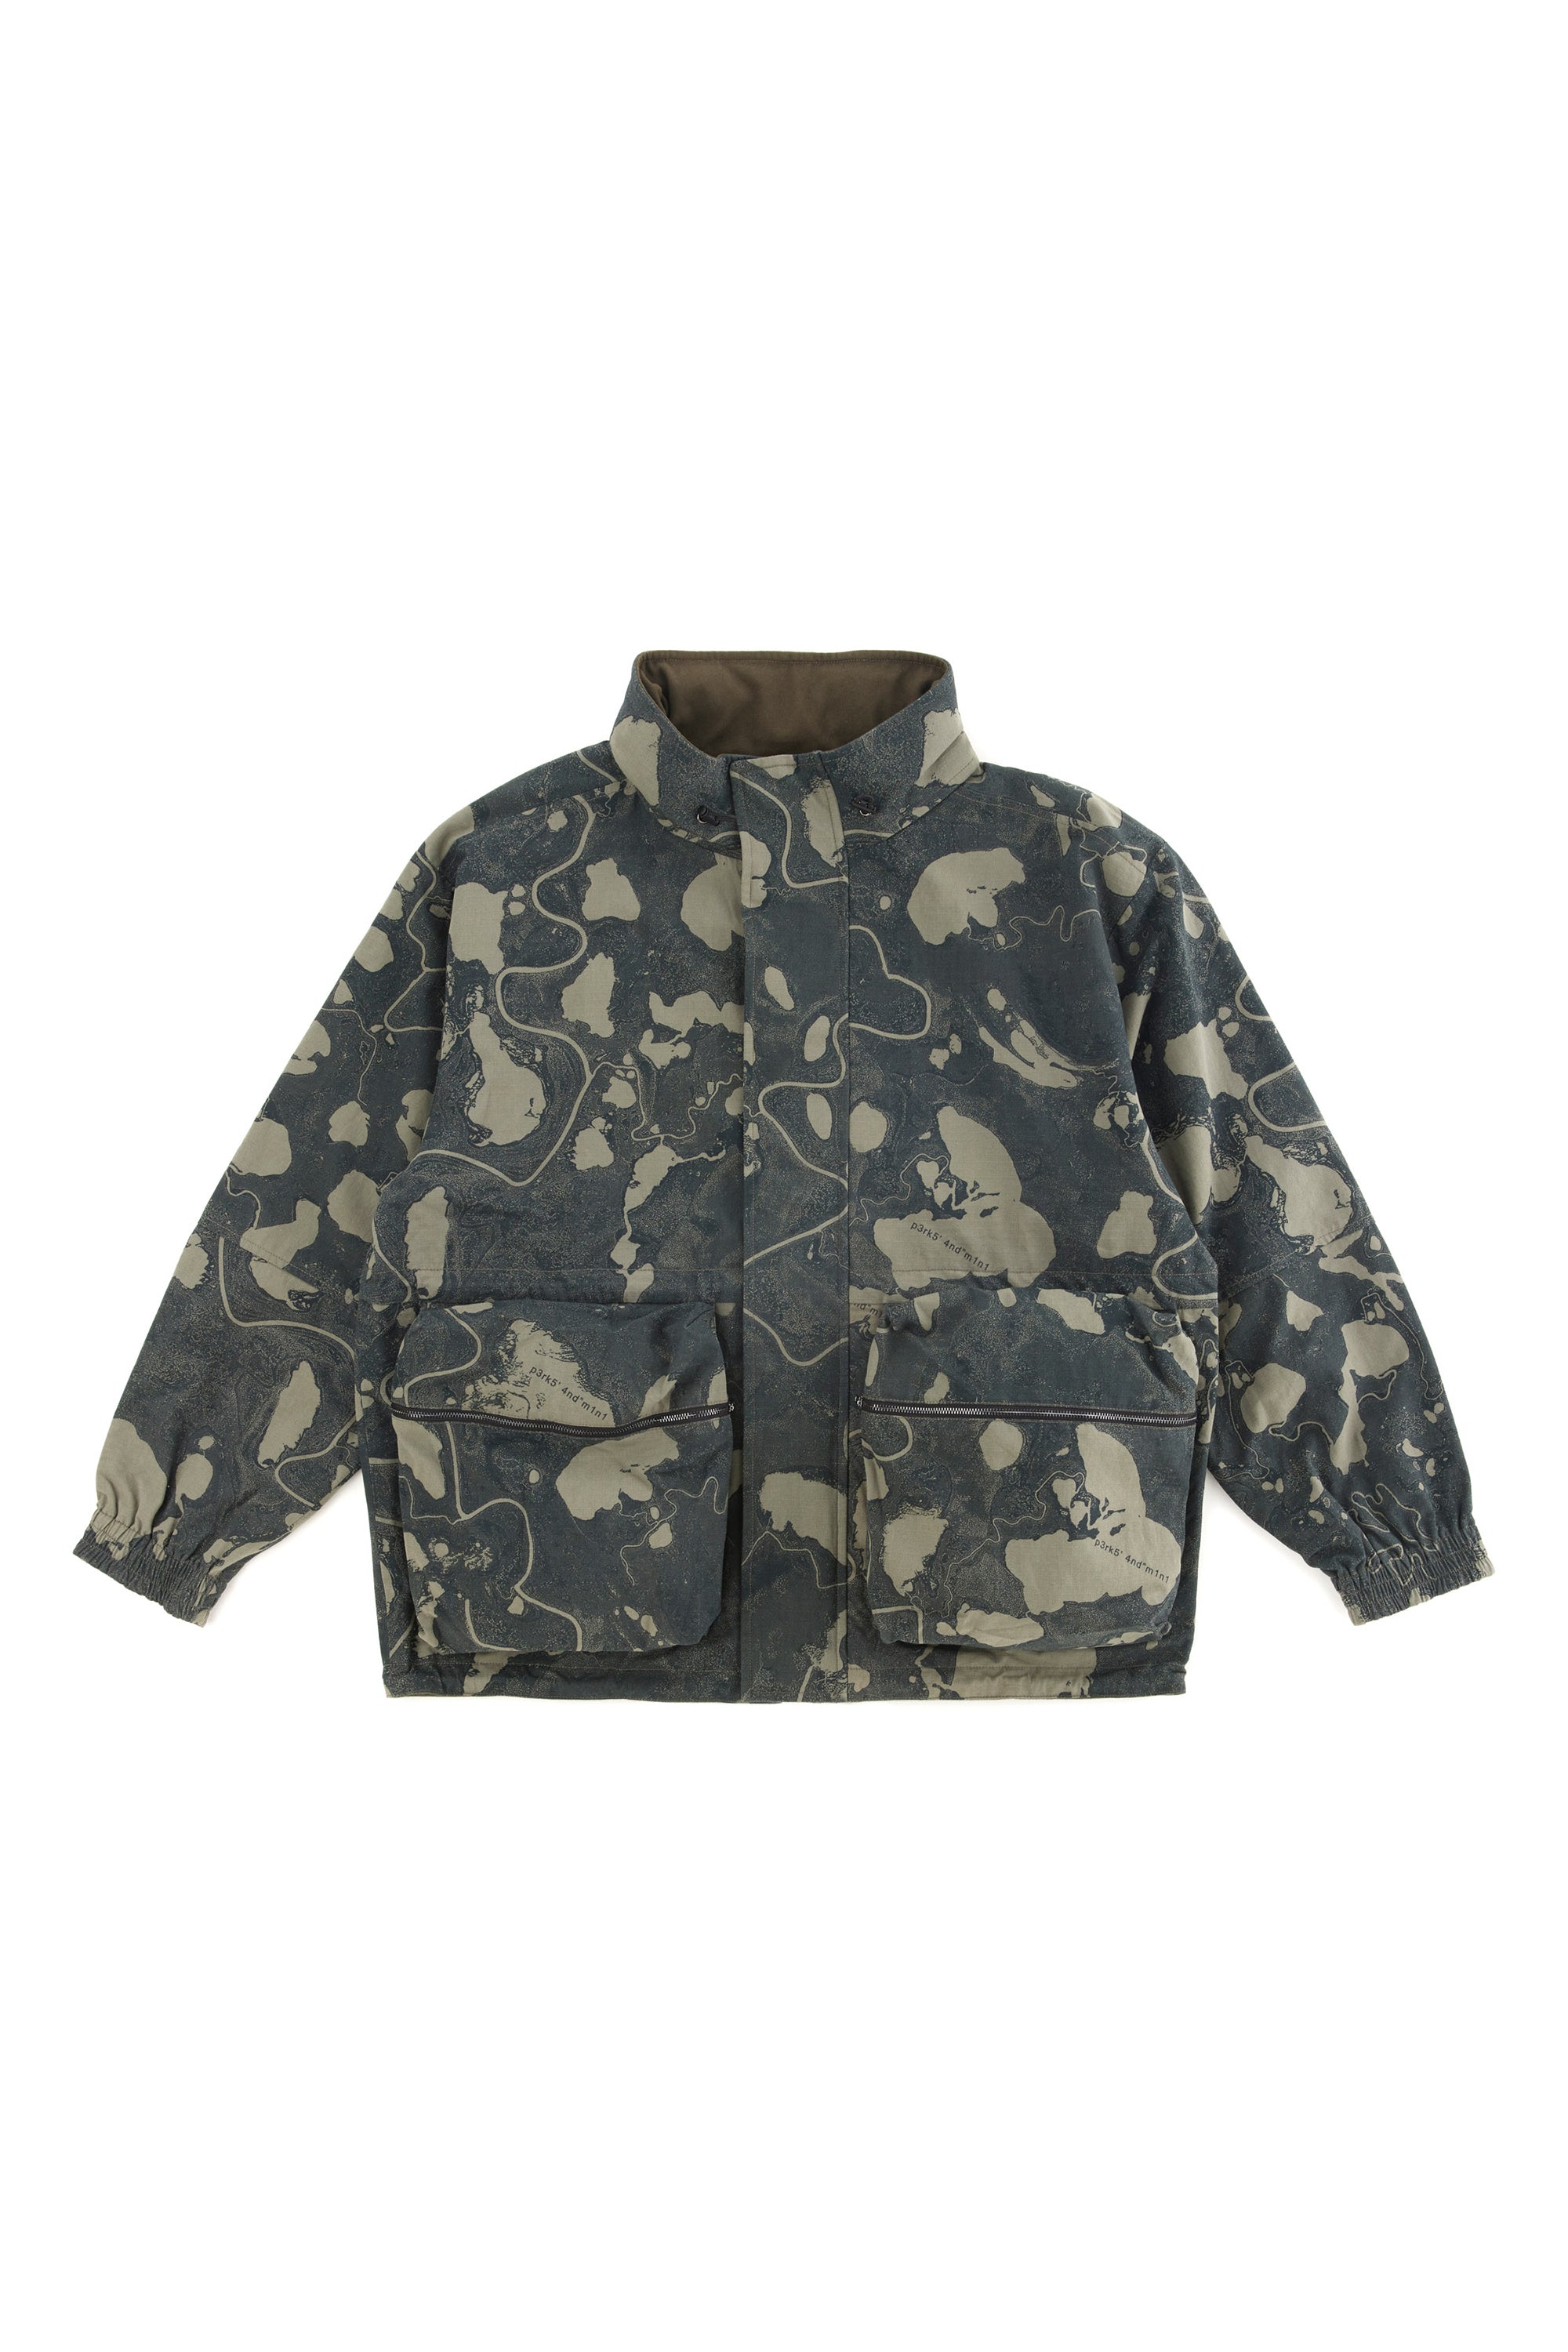 The REVERSIBLE GEO MAPPING PARKA JACKET  available online with global shipping, and in PAM Stores Melbourne and Sydney.